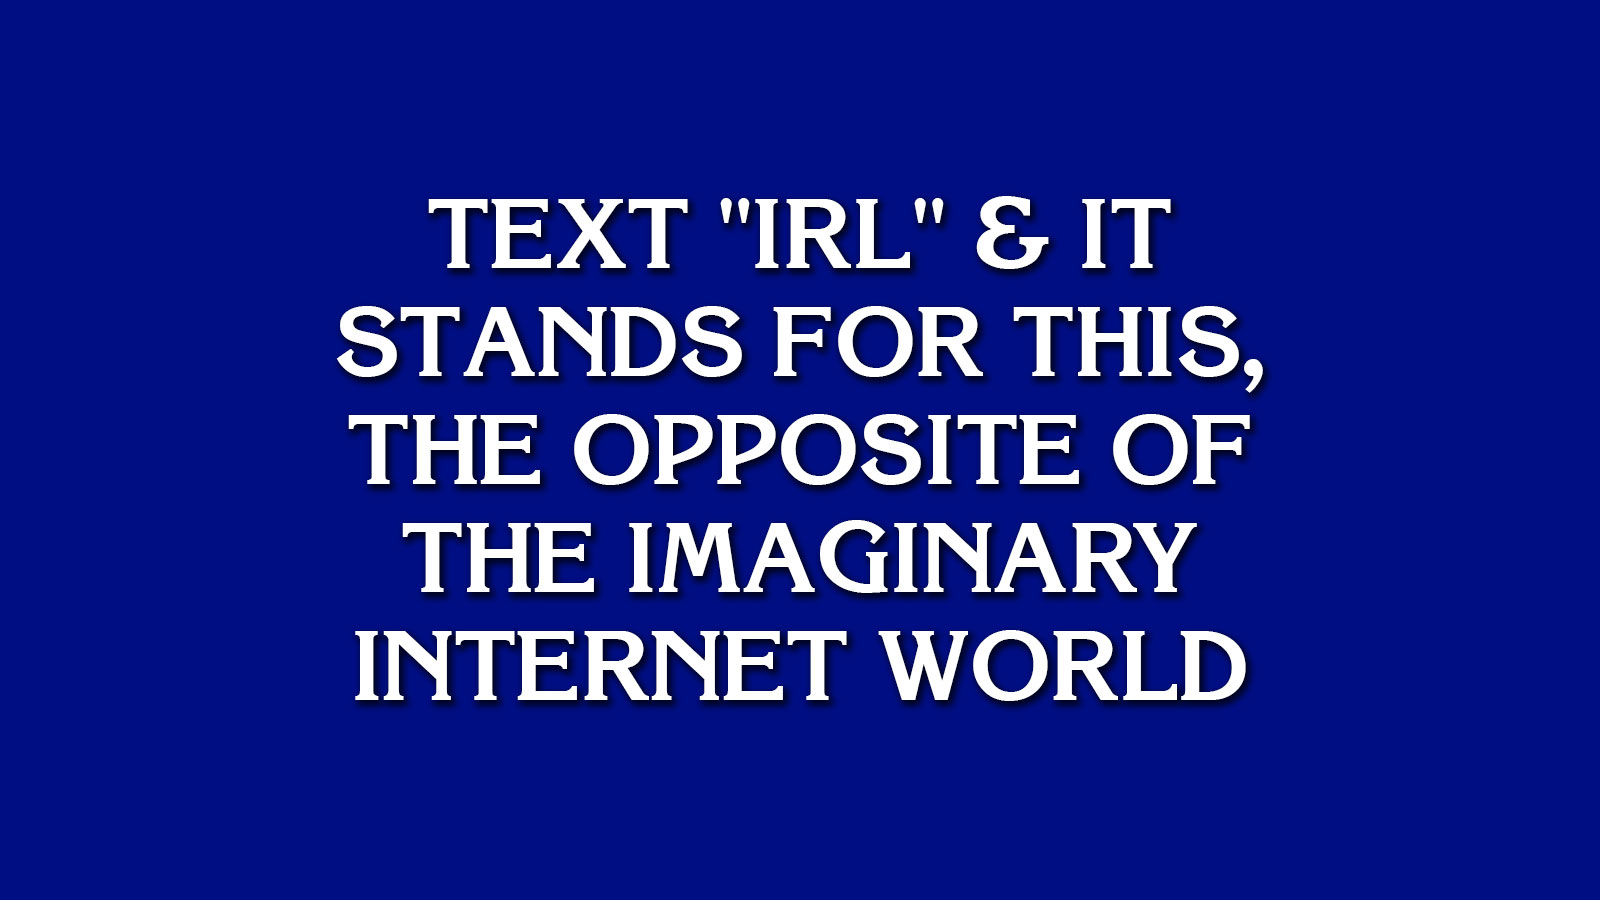 Can You Beat an Easy Game of “Jeopardy!”? 415